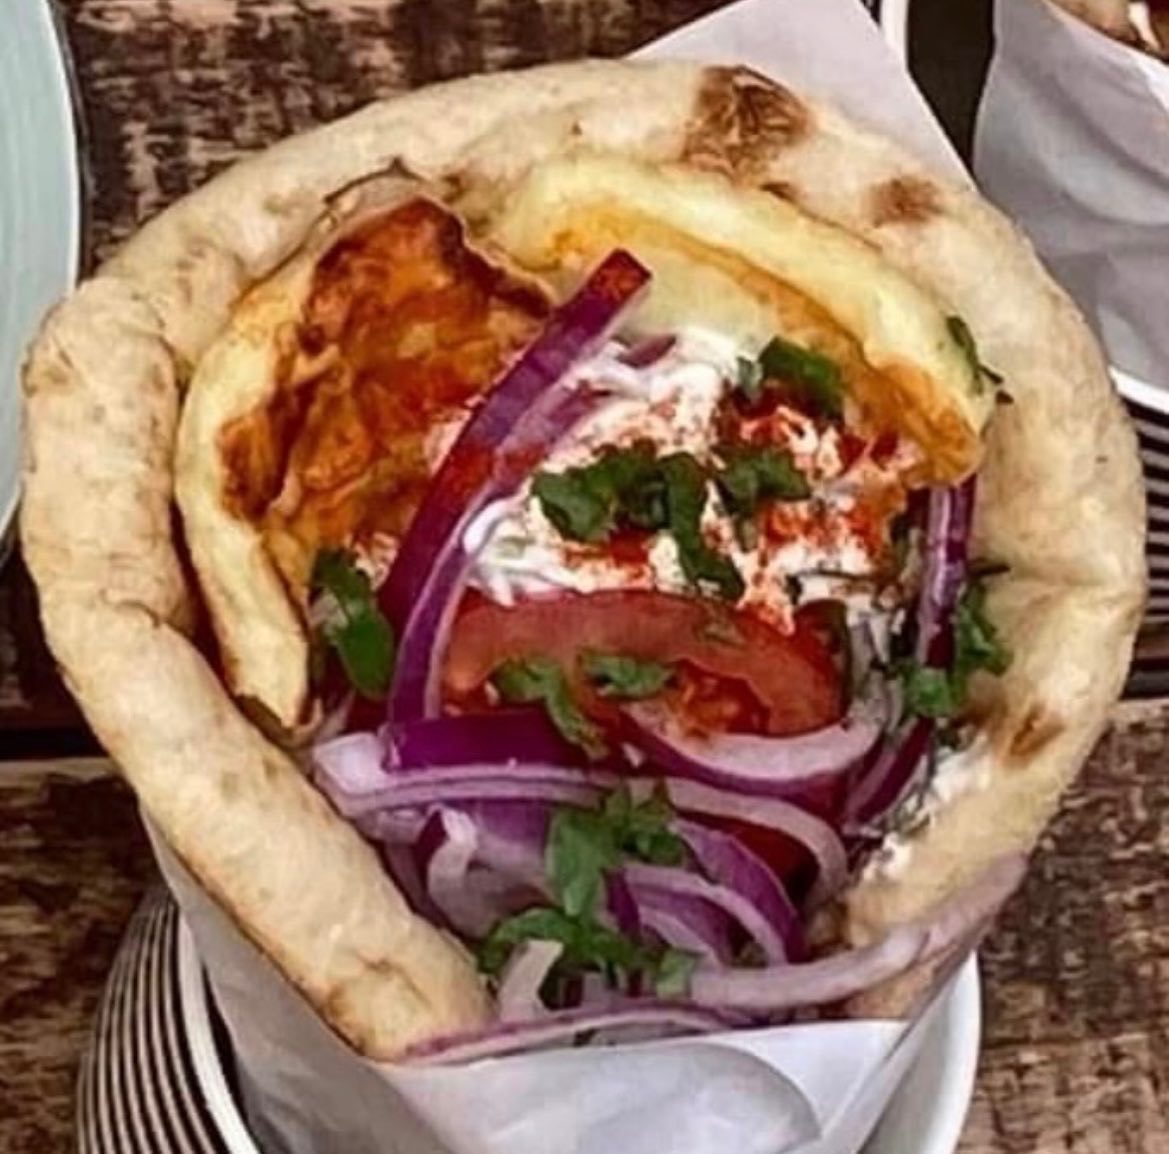 We are back today at Cheese and grain 🇬🇷🇬🇷🇬🇷 come and grab your gyros